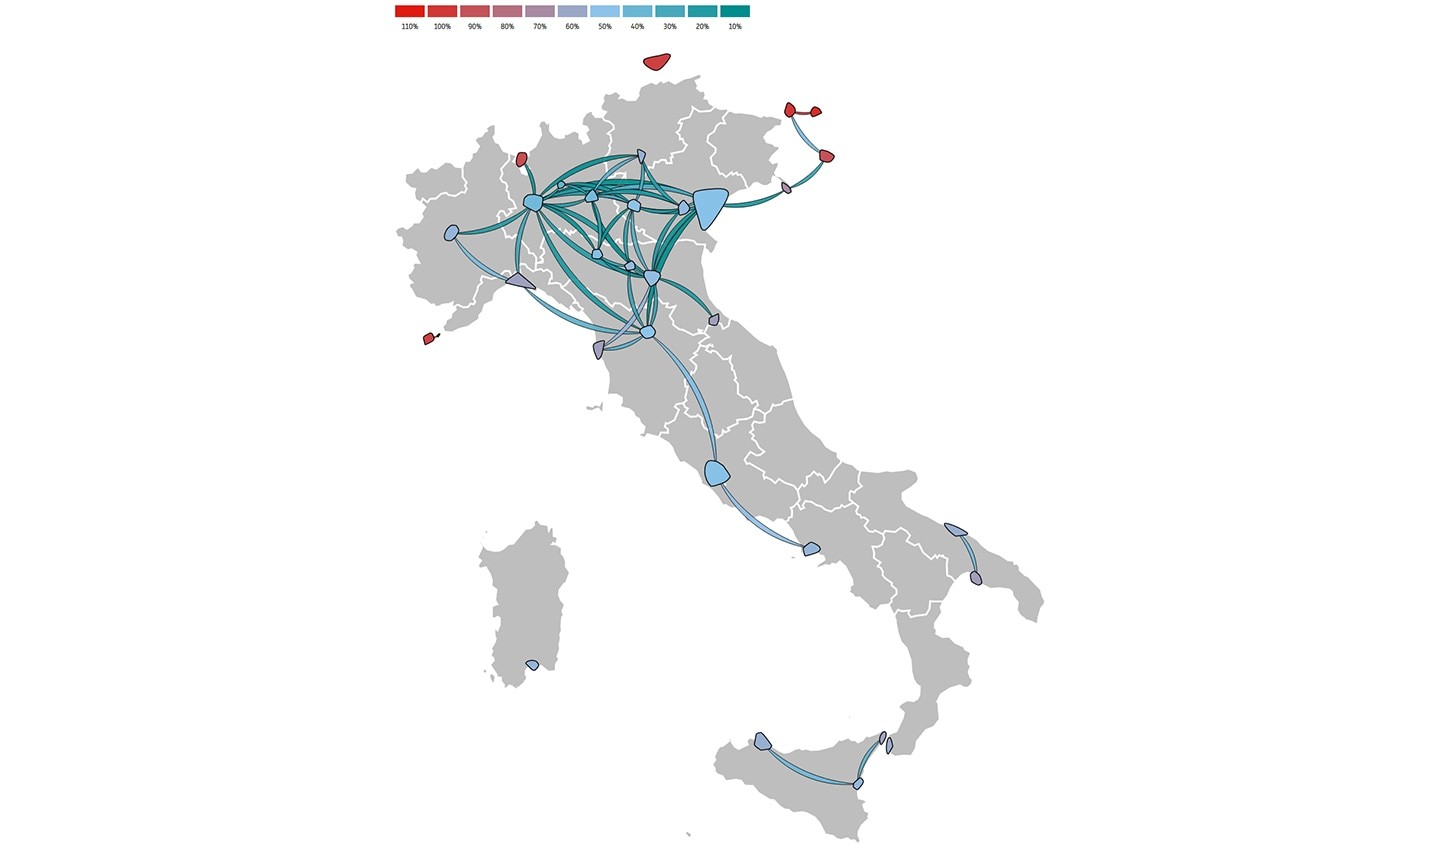 Remaining mobility in Italy between March 7, 2020 and March 13, 2020 as a percentage of January traffic.